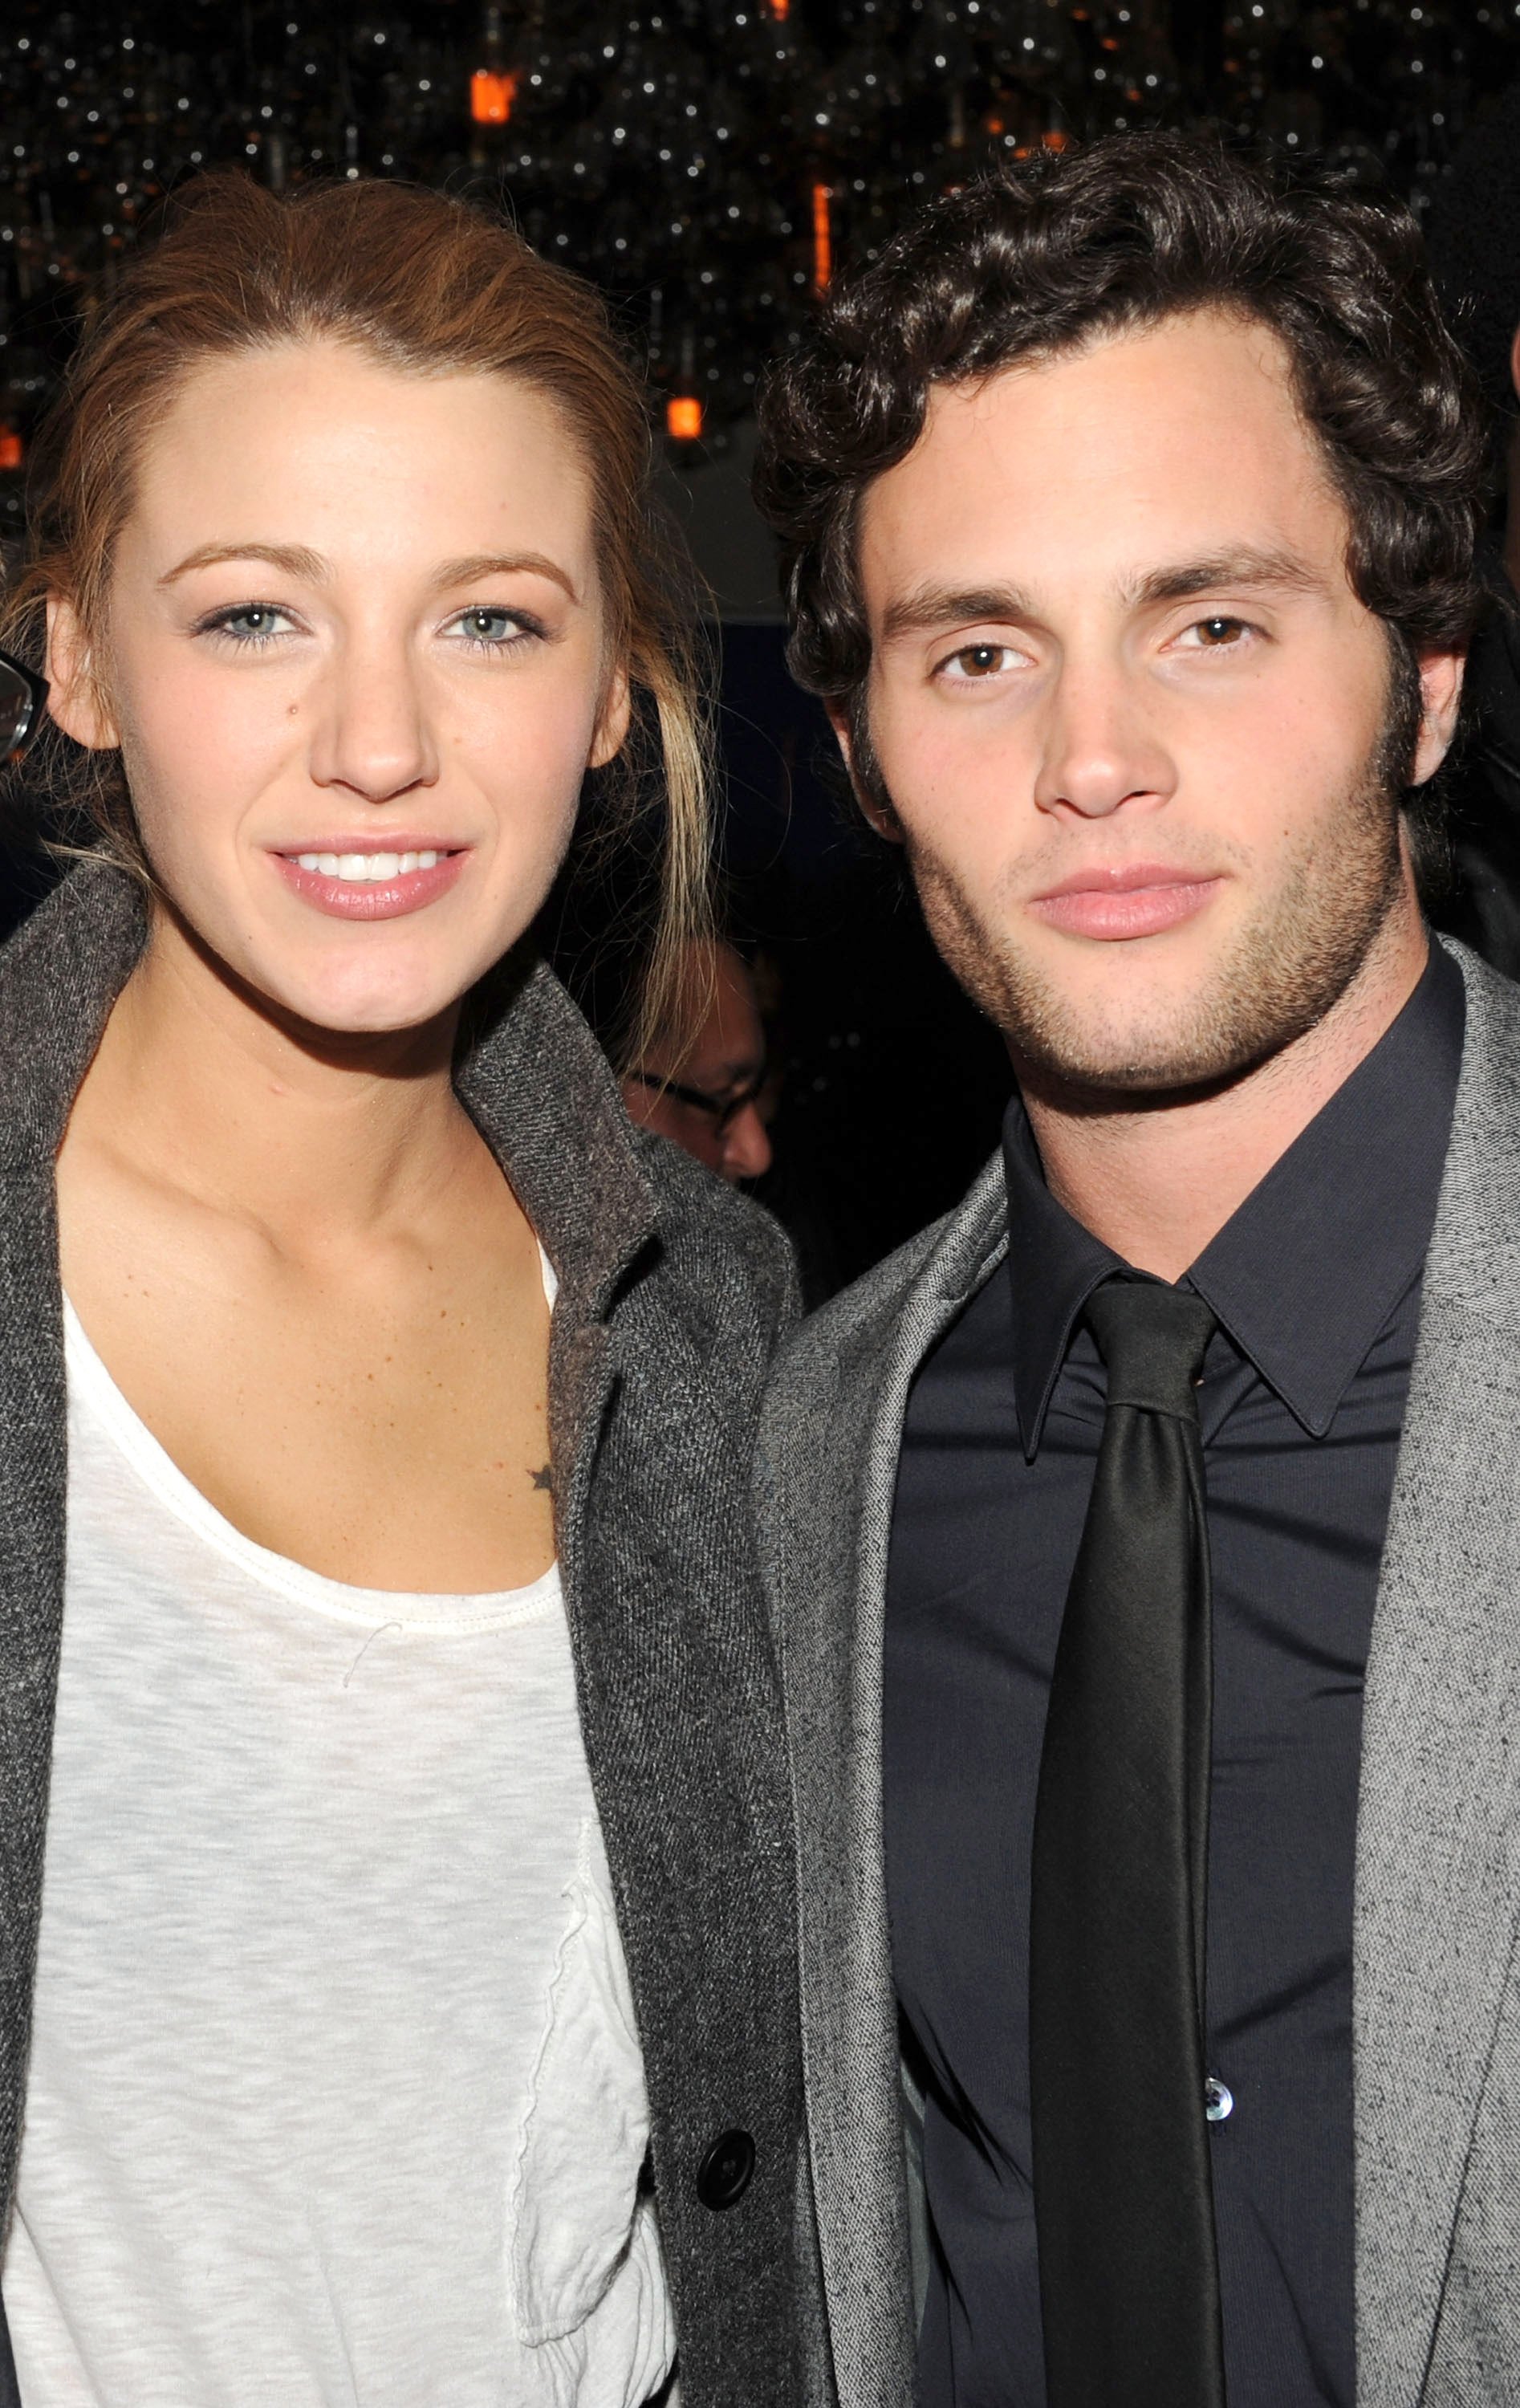 Penn Badgley and Blake Lively at the Gramercy Park Hotel on October 12, 2009 in New York City. | Source: Getty Images